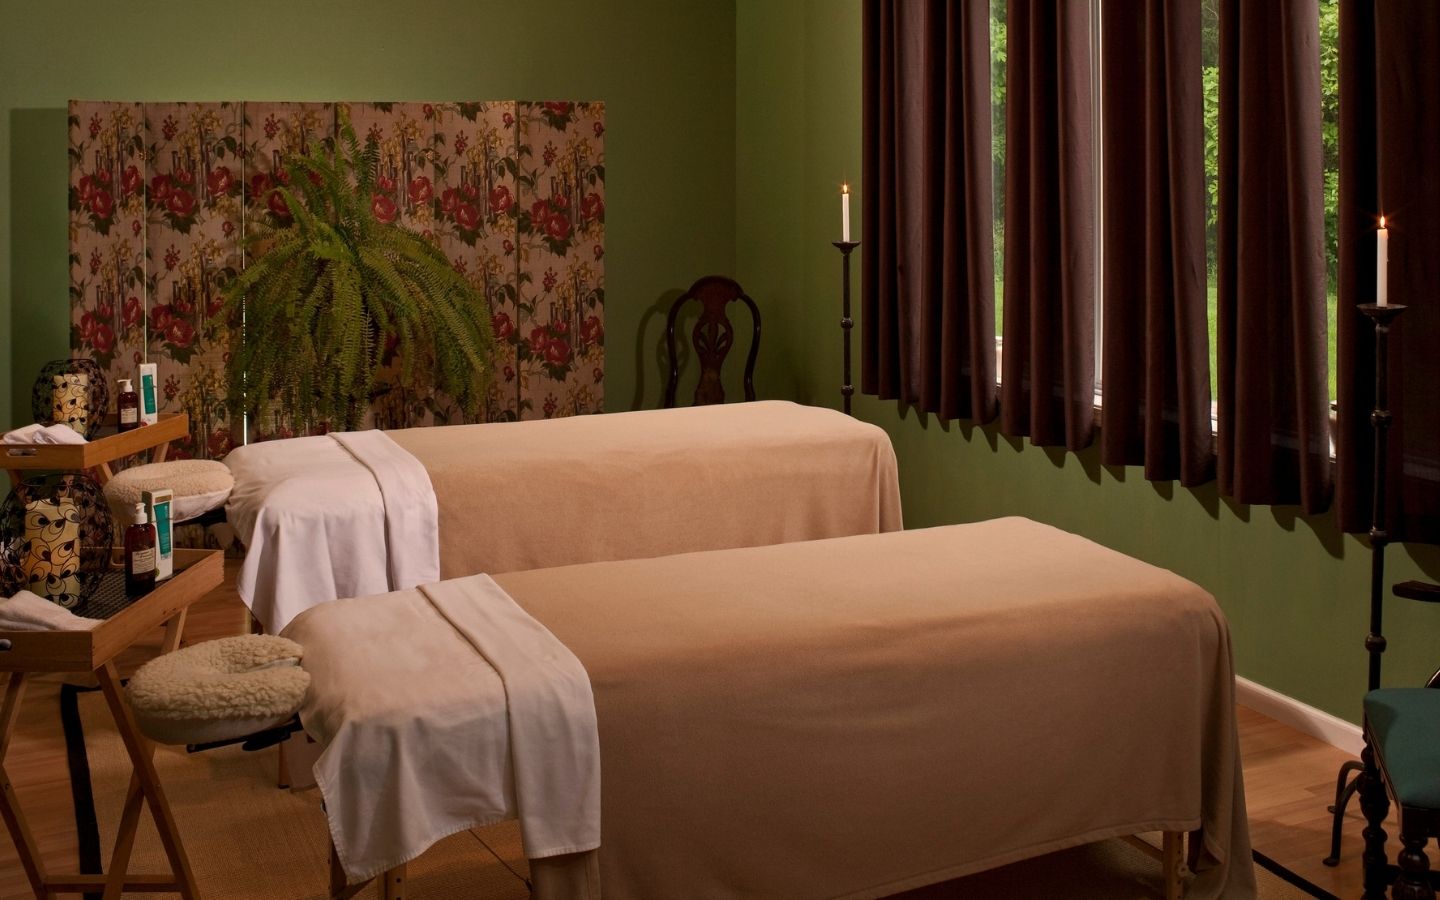 Cozy and tranquil massage room with dim lighting, two massage tablesl for couple's massages